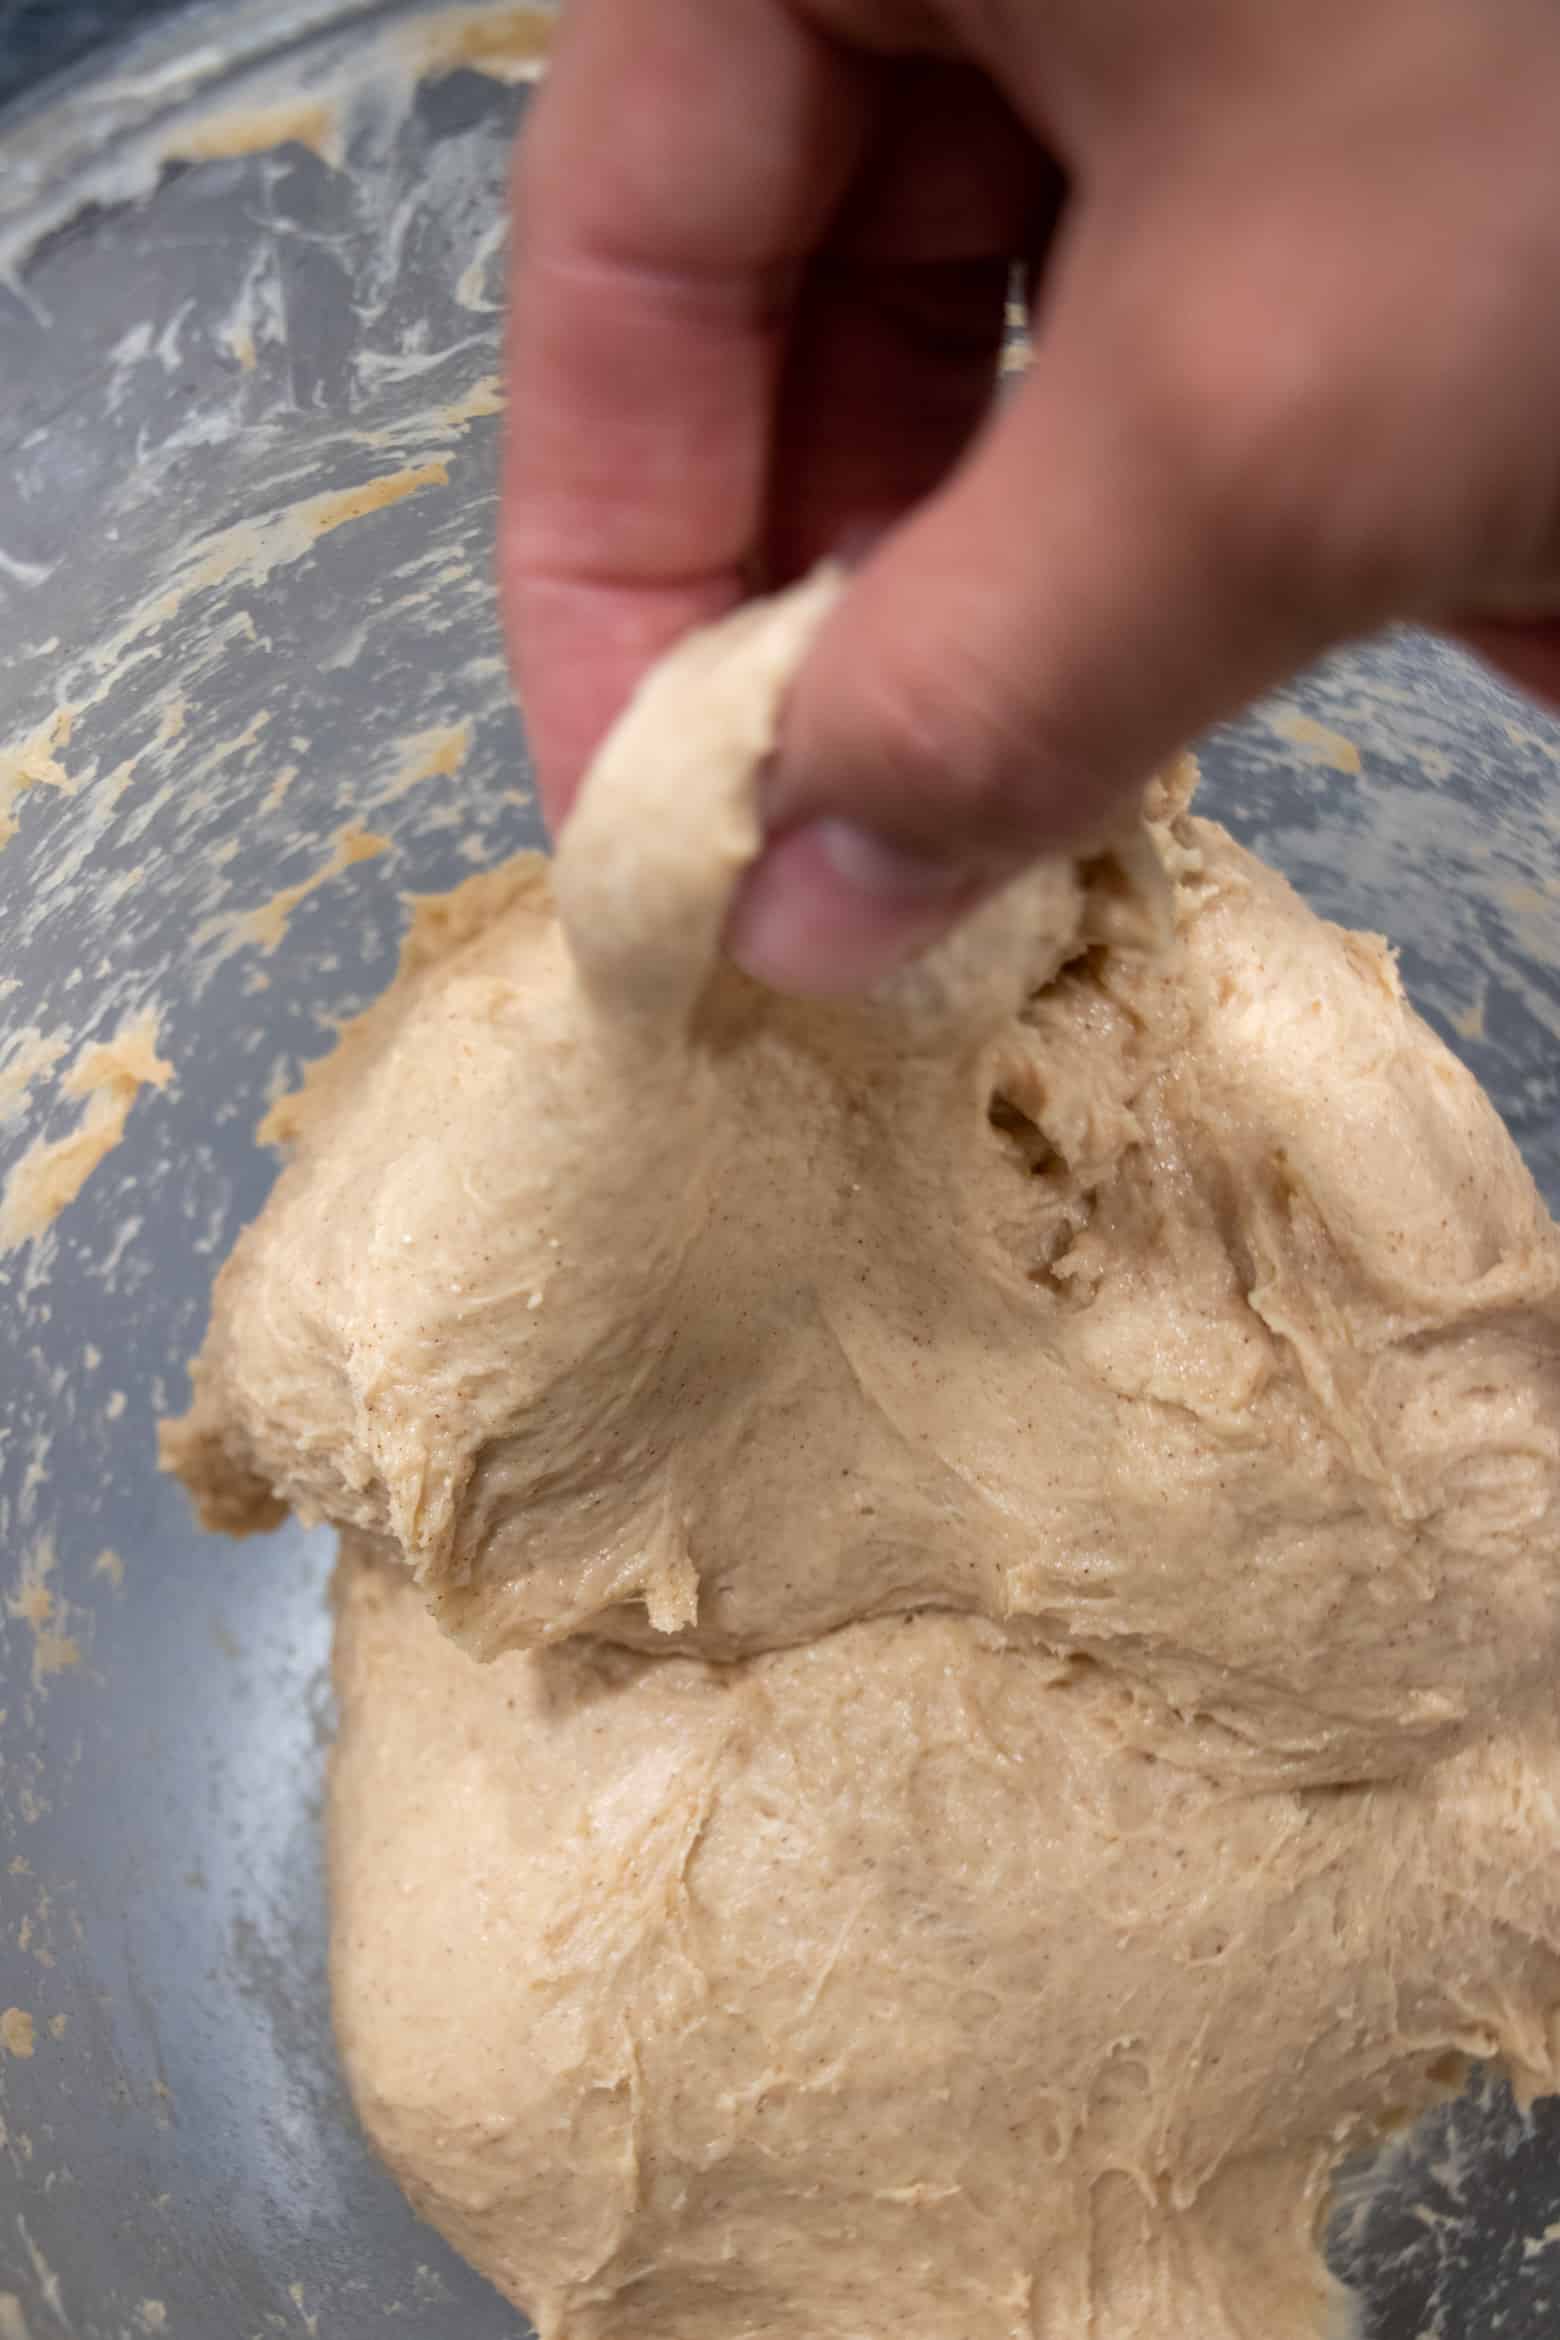 finger showing correct texture for liege waffles dough